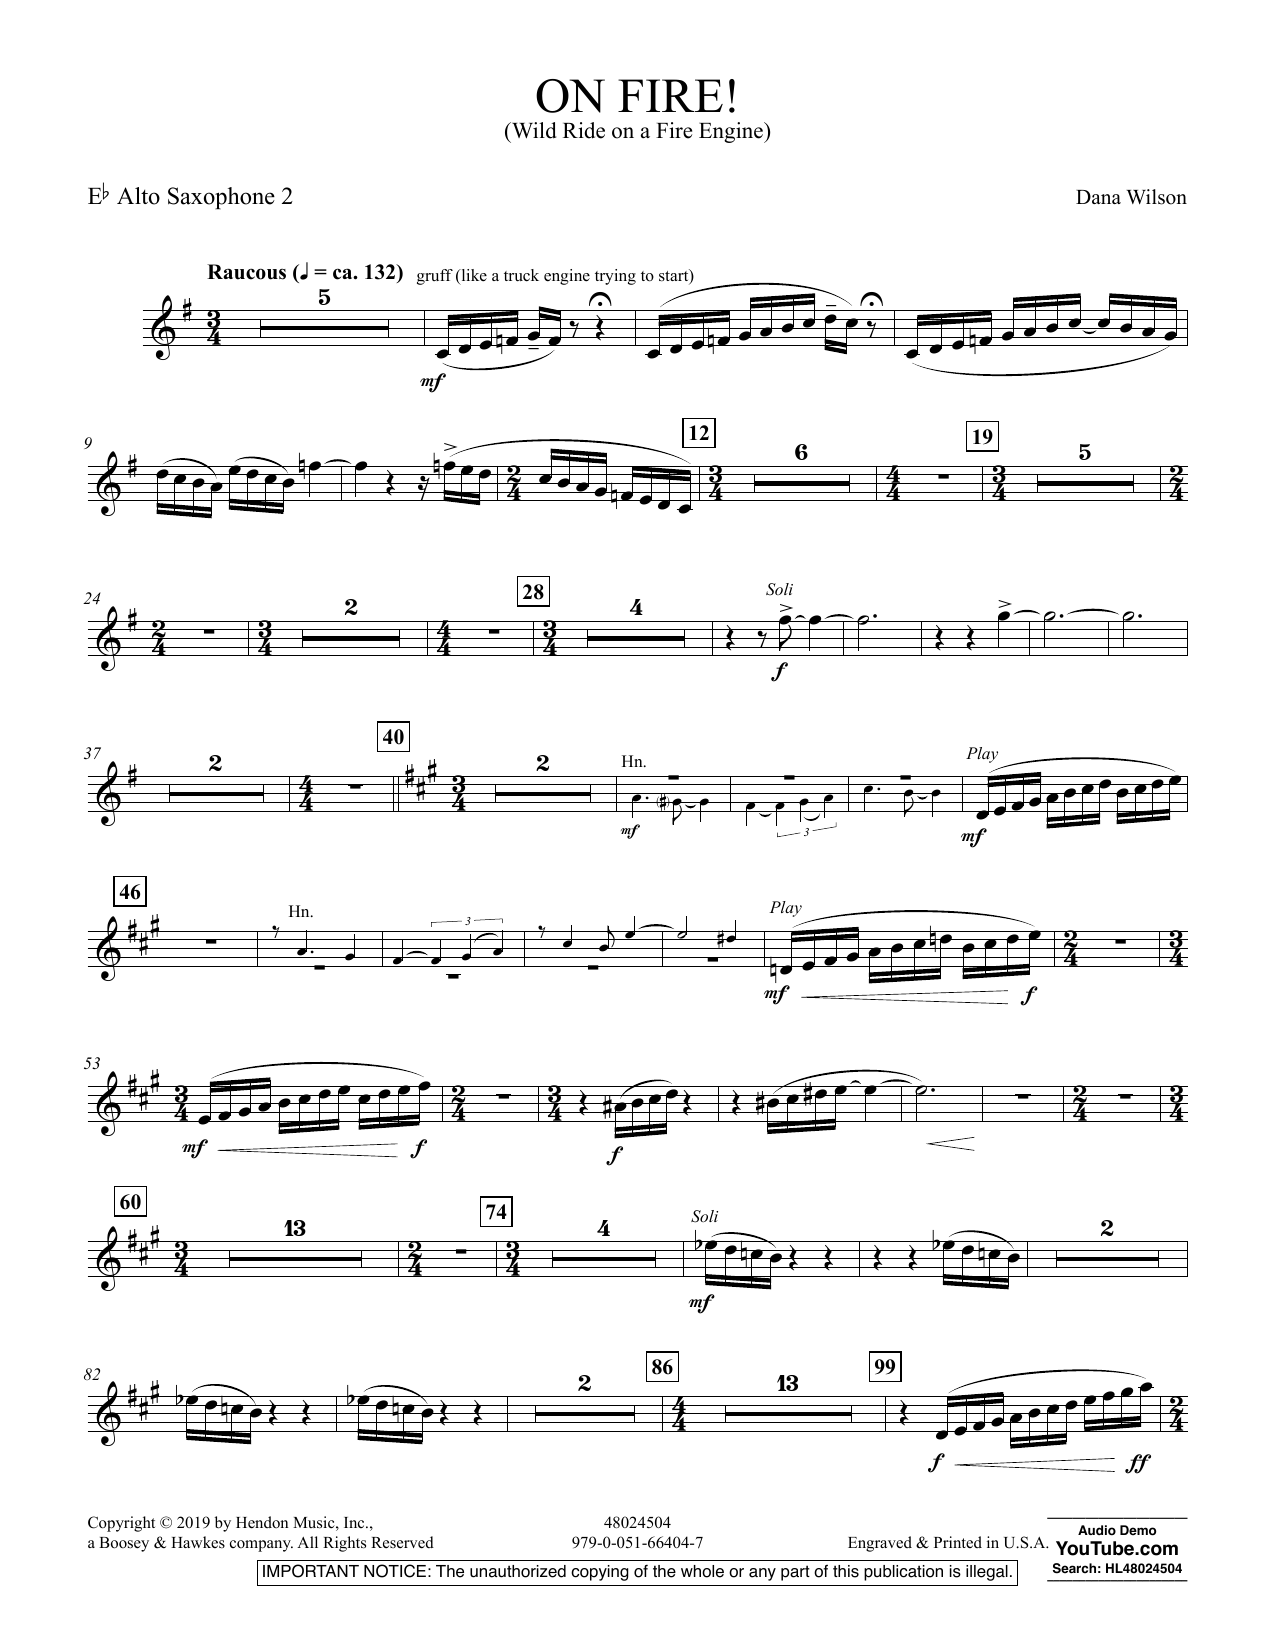 Dana Wilson On Fire! (Wild Ride on a Fire Engine) - Eb Alto Saxophone 2 sheet music preview music notes and score for Concert Band including 2 page(s)